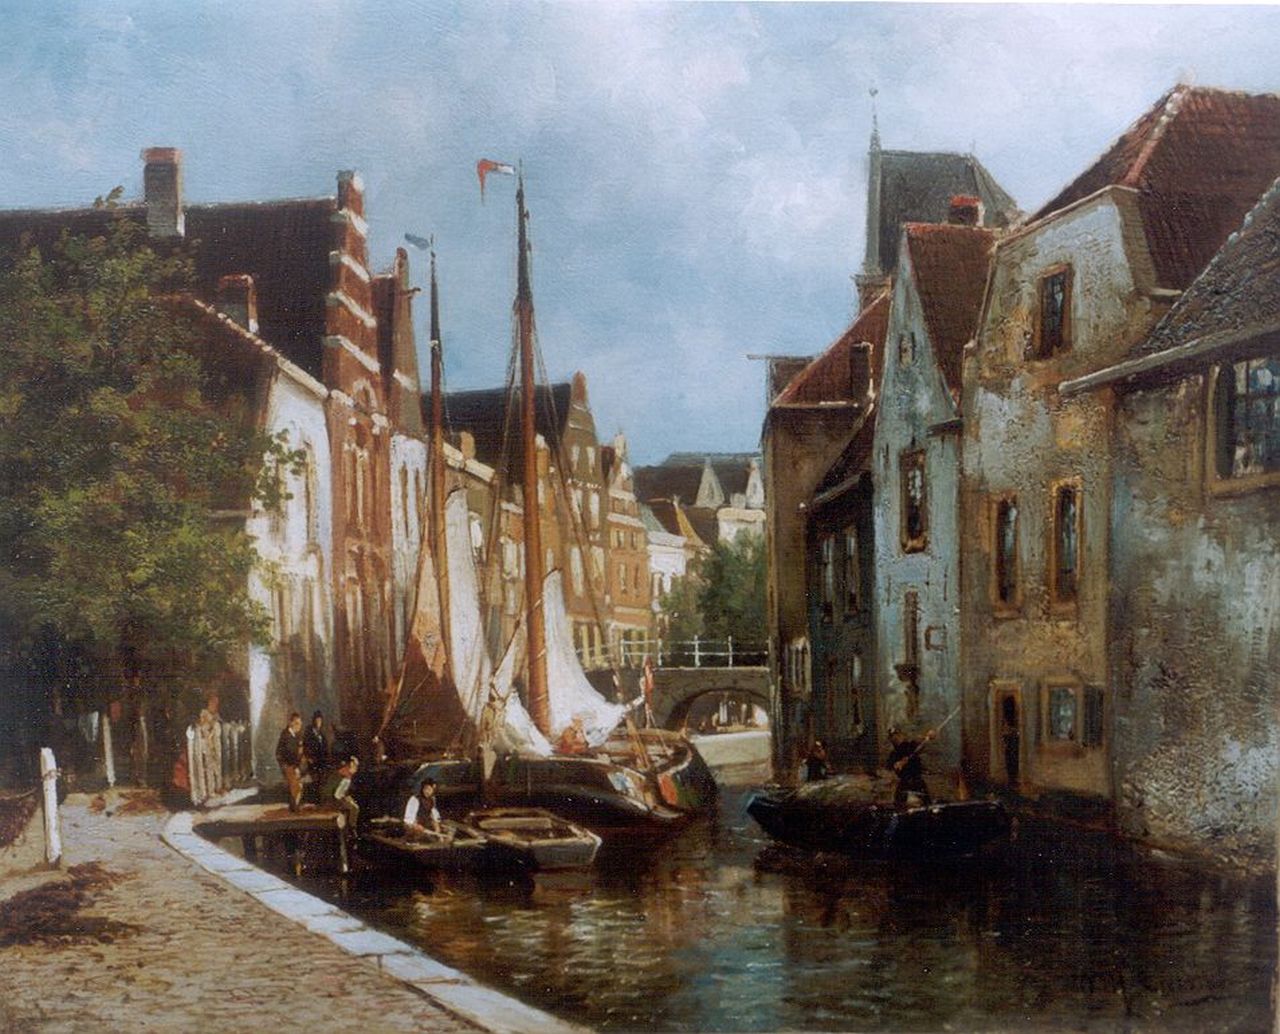 Eickelberg W.H.  | Willem Hendrik Eickelberg, A view of a canal with moored boats, Öl auf Leinwand 31,4 x 36,1 cm, signed l.r.